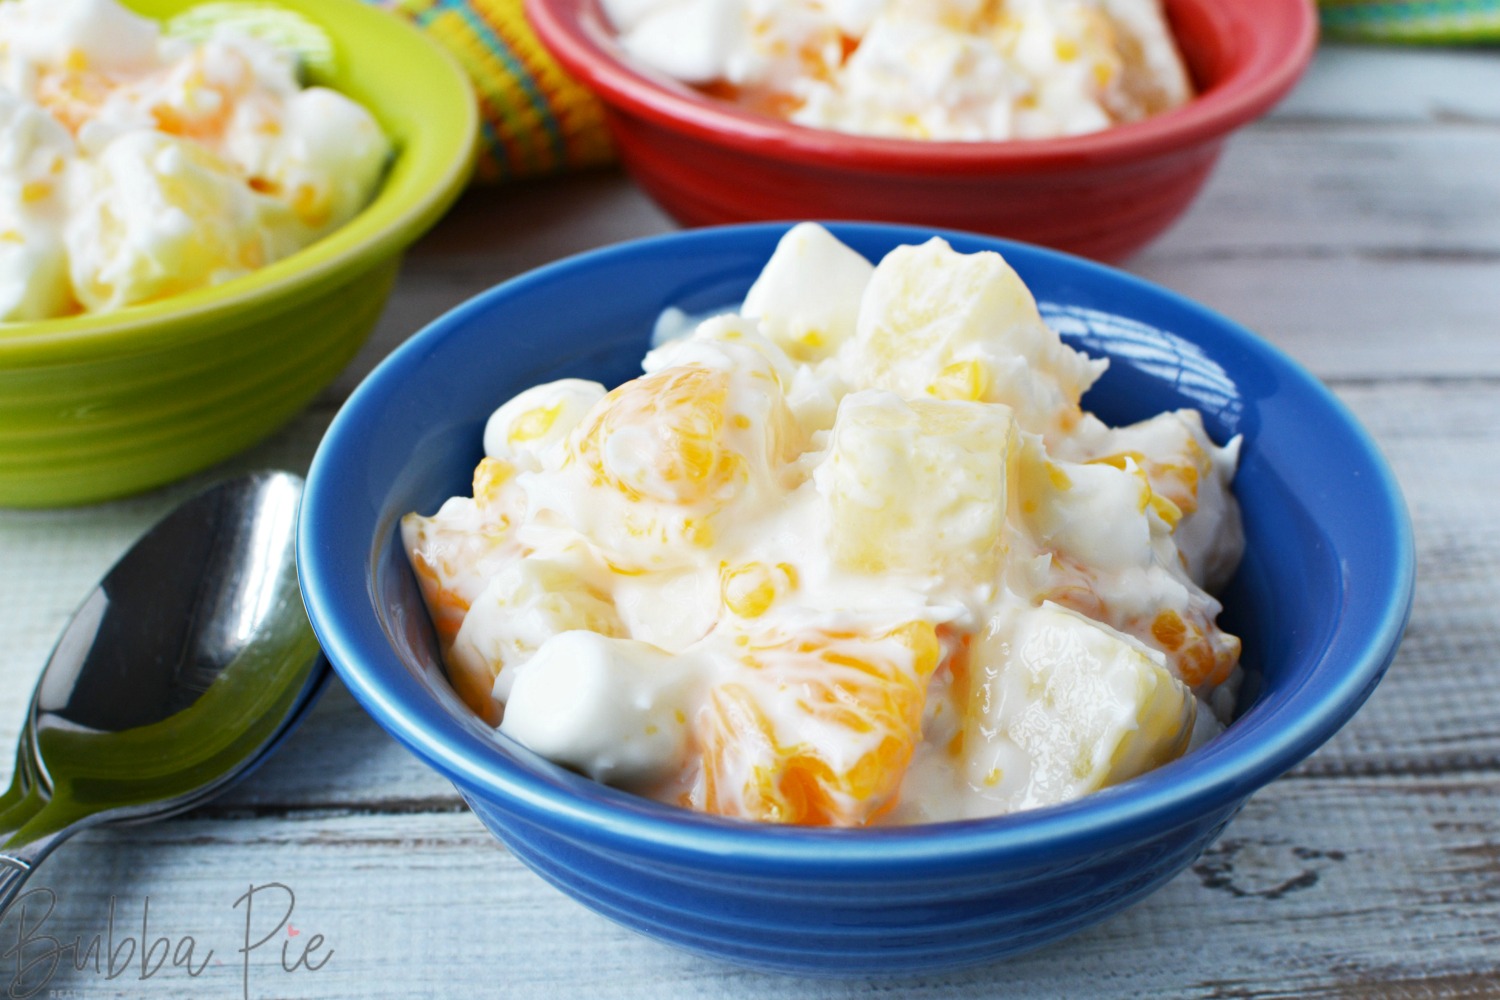 This 5 cup salad has oranges, pineapple, sour cream and marshmallows. 